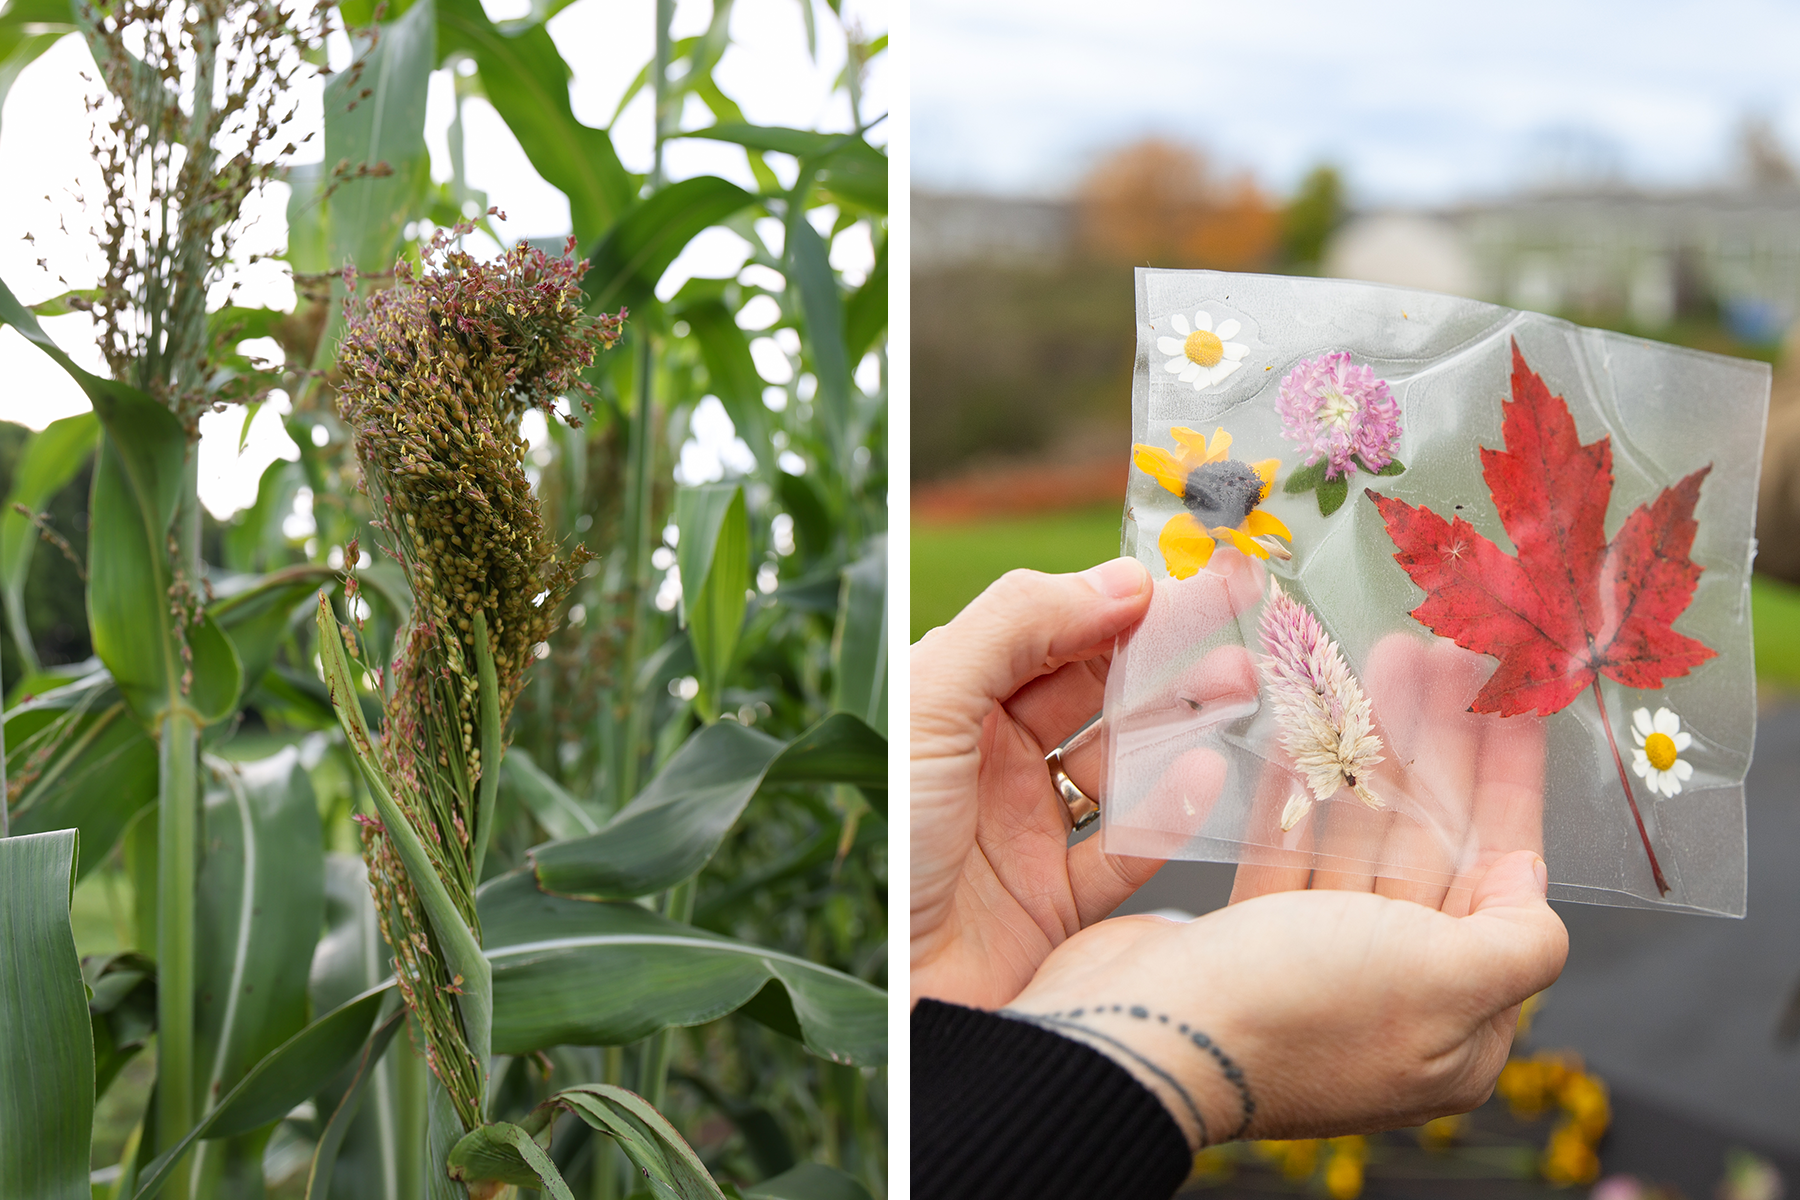 Broom corn (left) forms long, fibrous tassels. Pressing flowers and leaves between sheets of contact paper (right) is an easy craft for all ages.